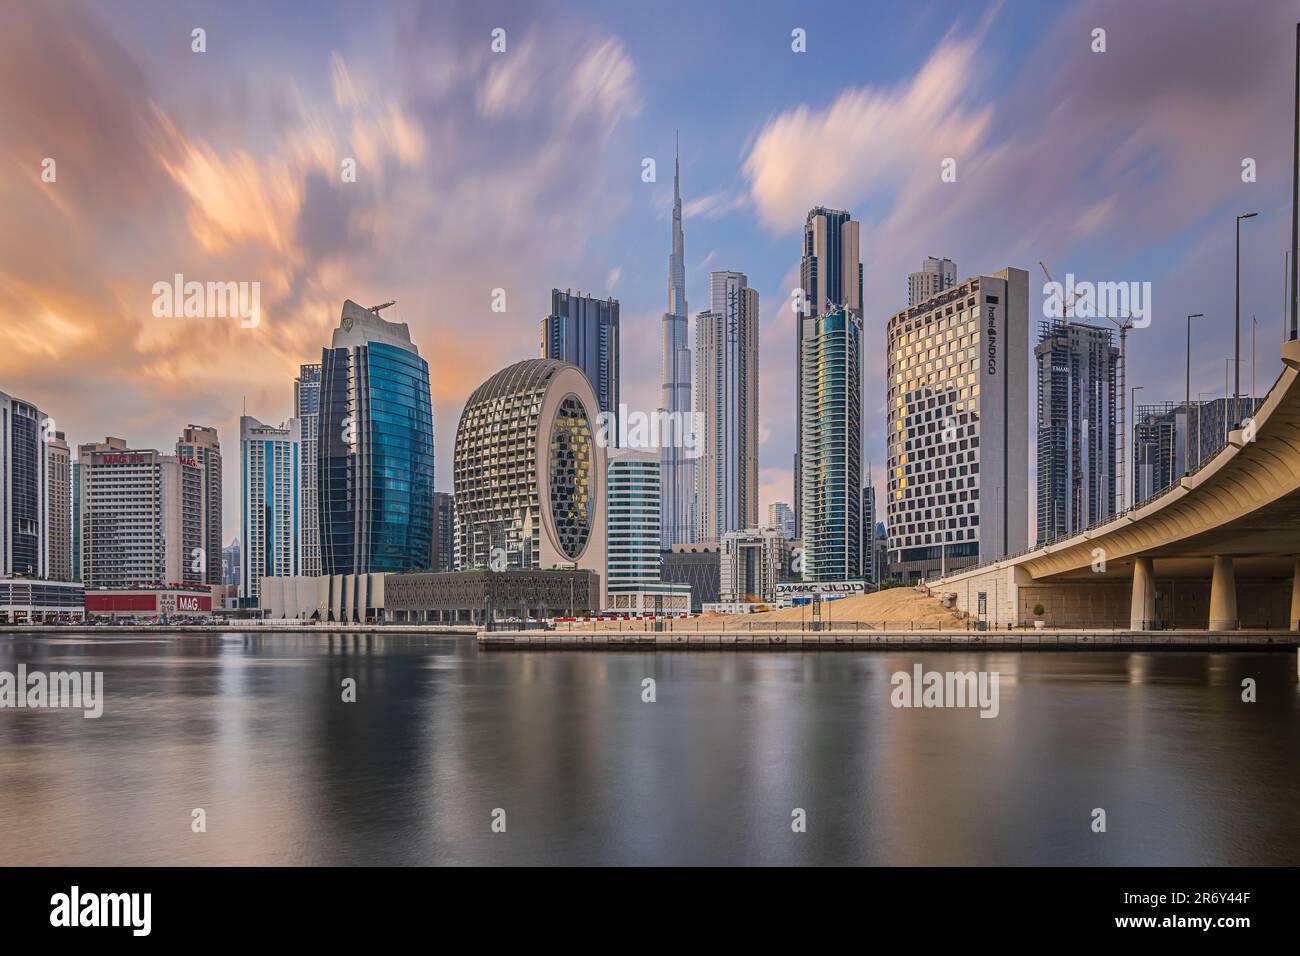 Long exposure at sunset in Dubai. Business center of the city with office buildings and skyscrapers around Burj Khalifa. Financial district skyline Stock Photo